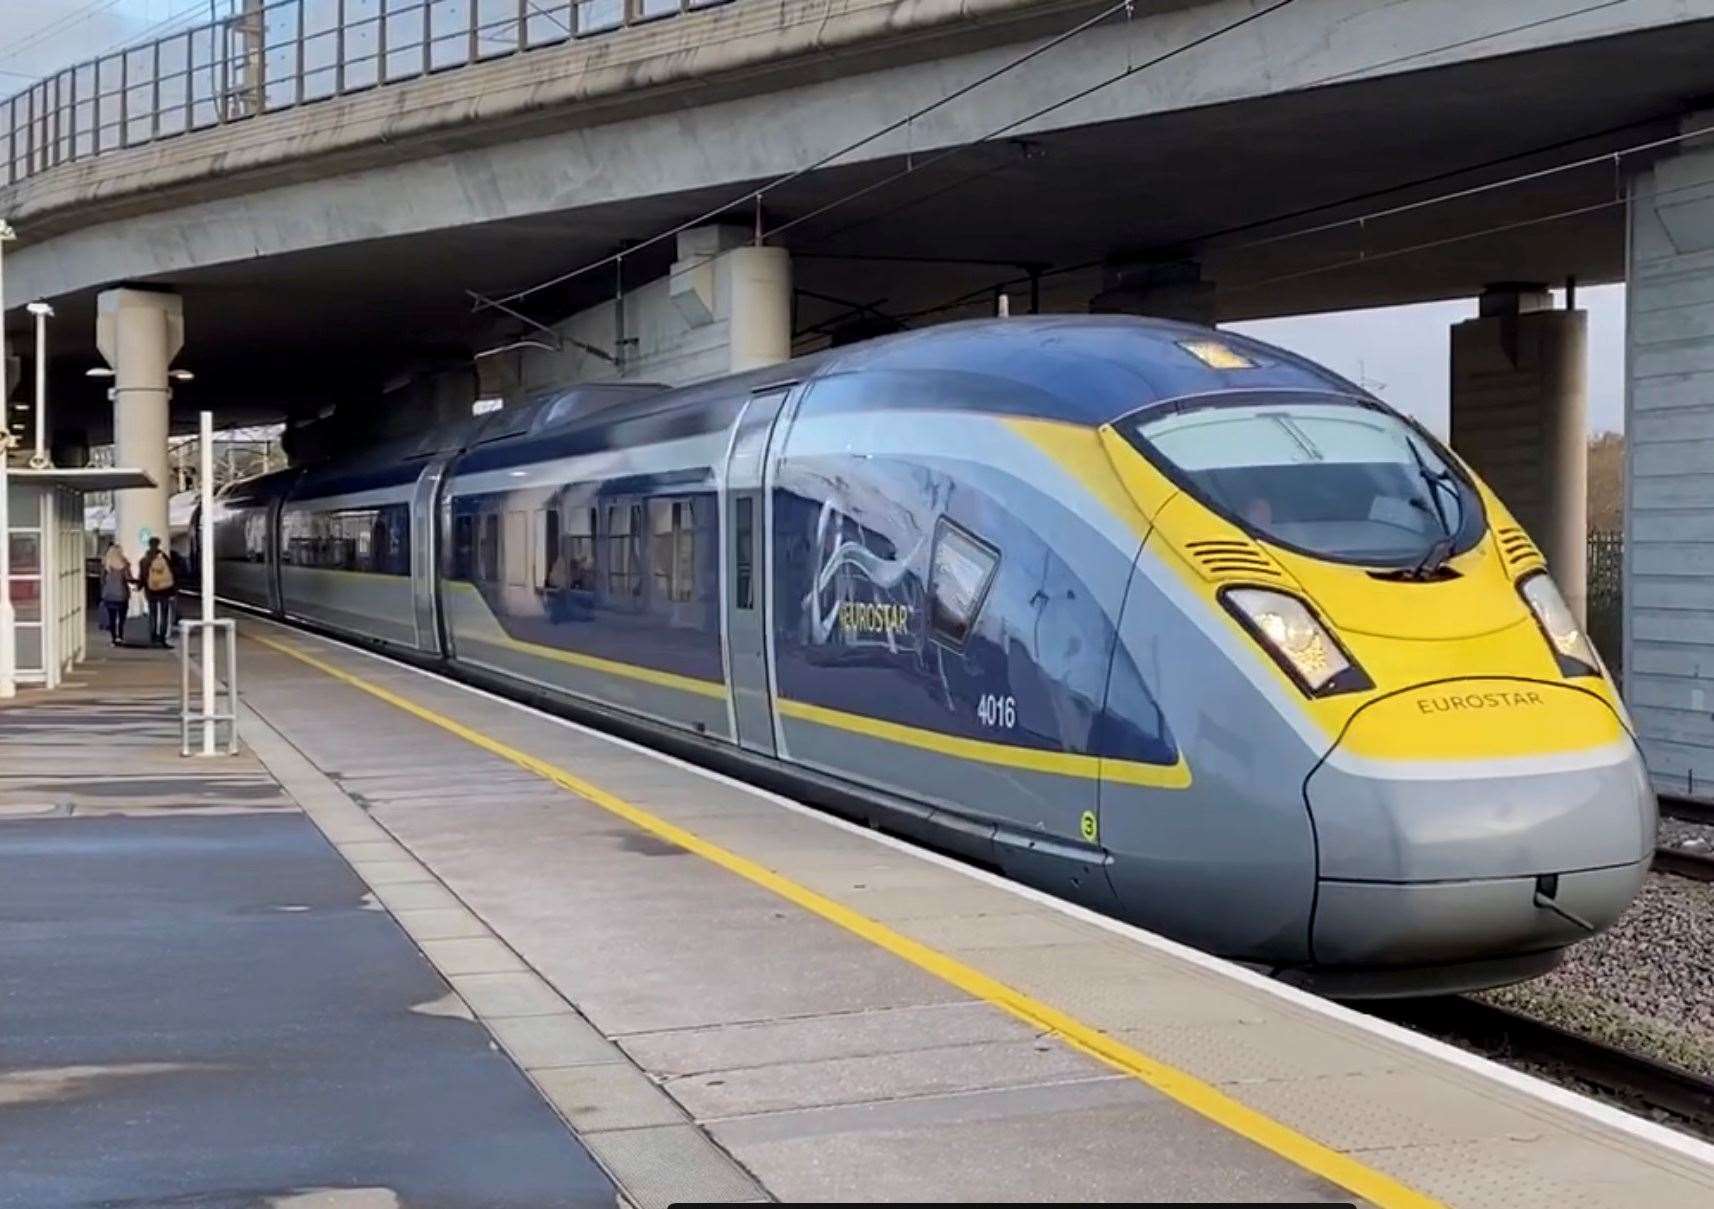 Eurostar trains have not stopped at Kent stations since the start of the pandemic in 2020